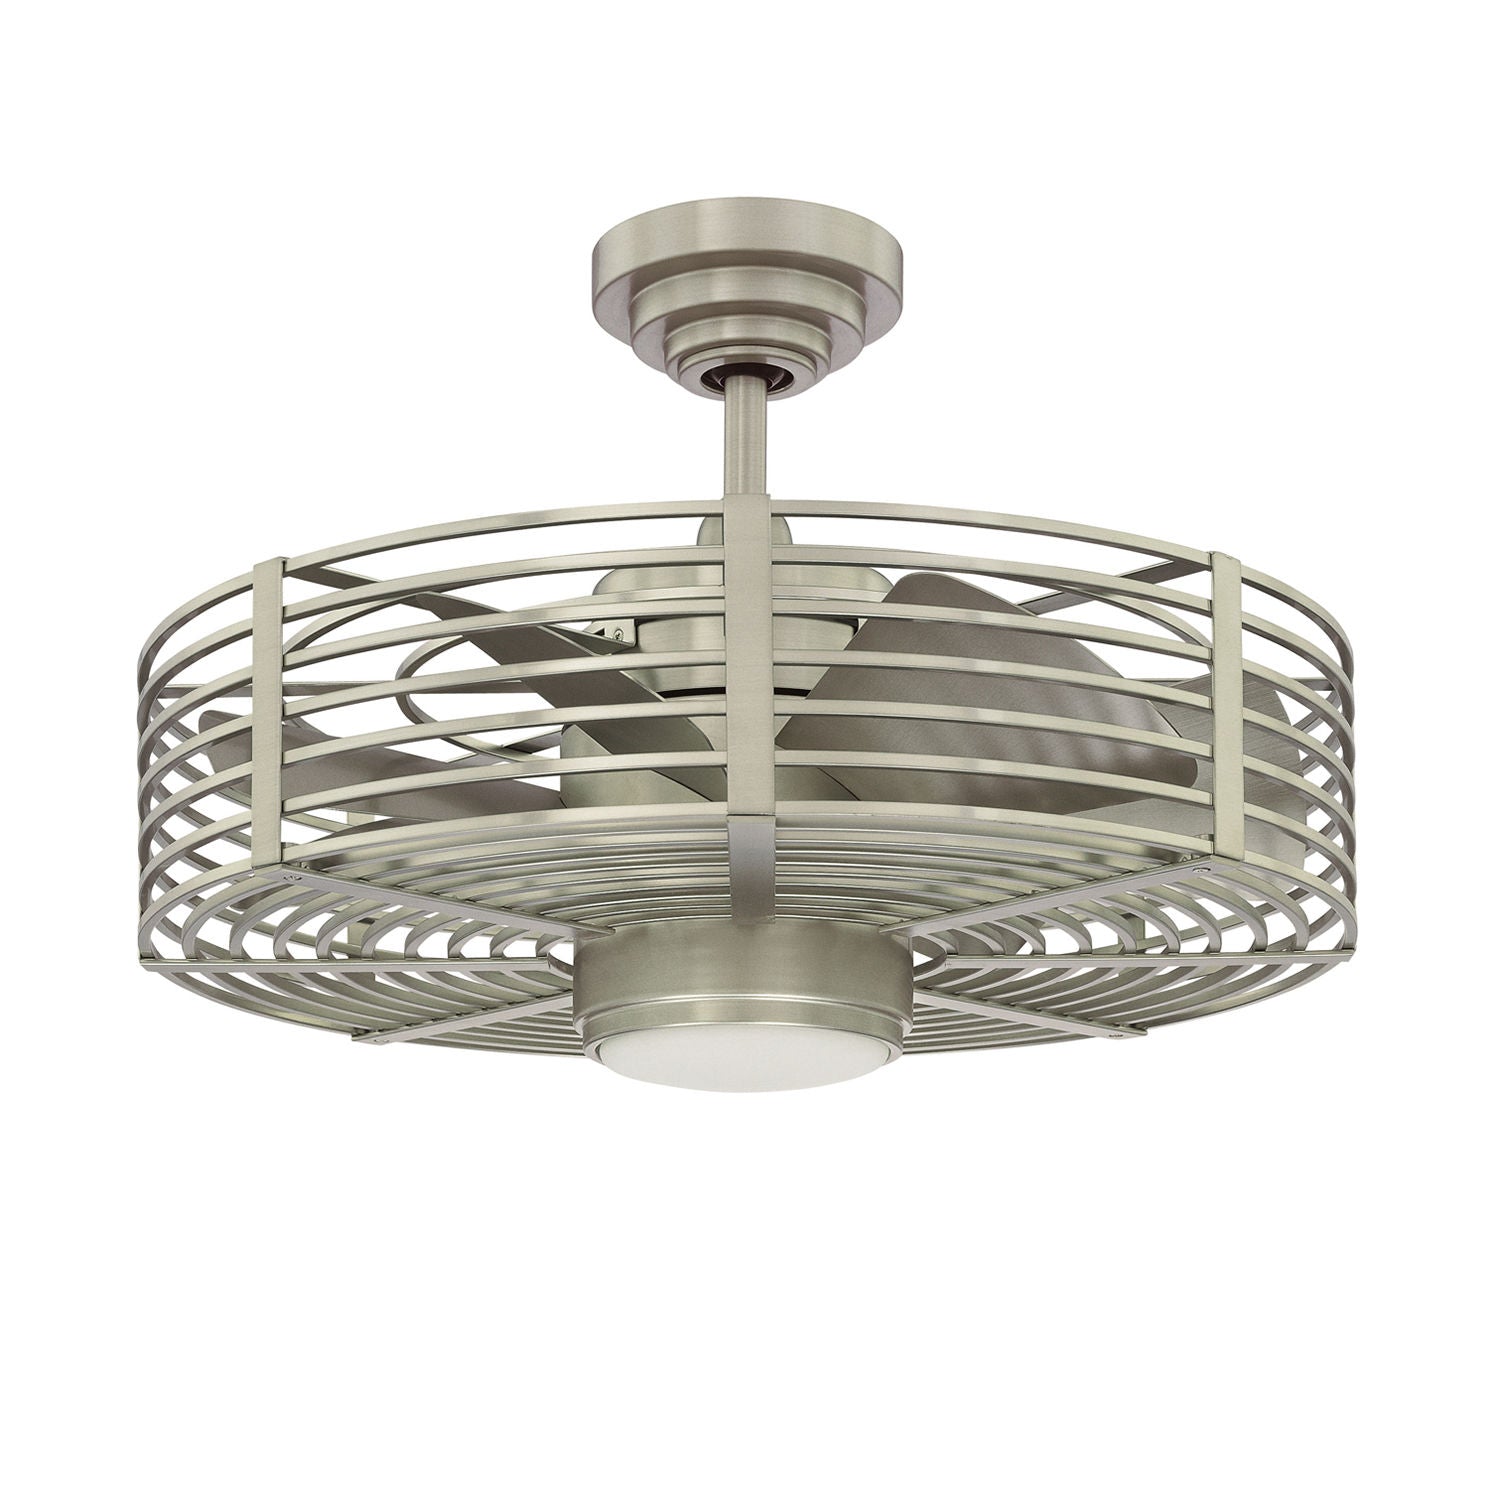 ENCLAVE LED Ceiling fan Stainless steel INTEGRATED LED - AC17723L-SN | KENDAL